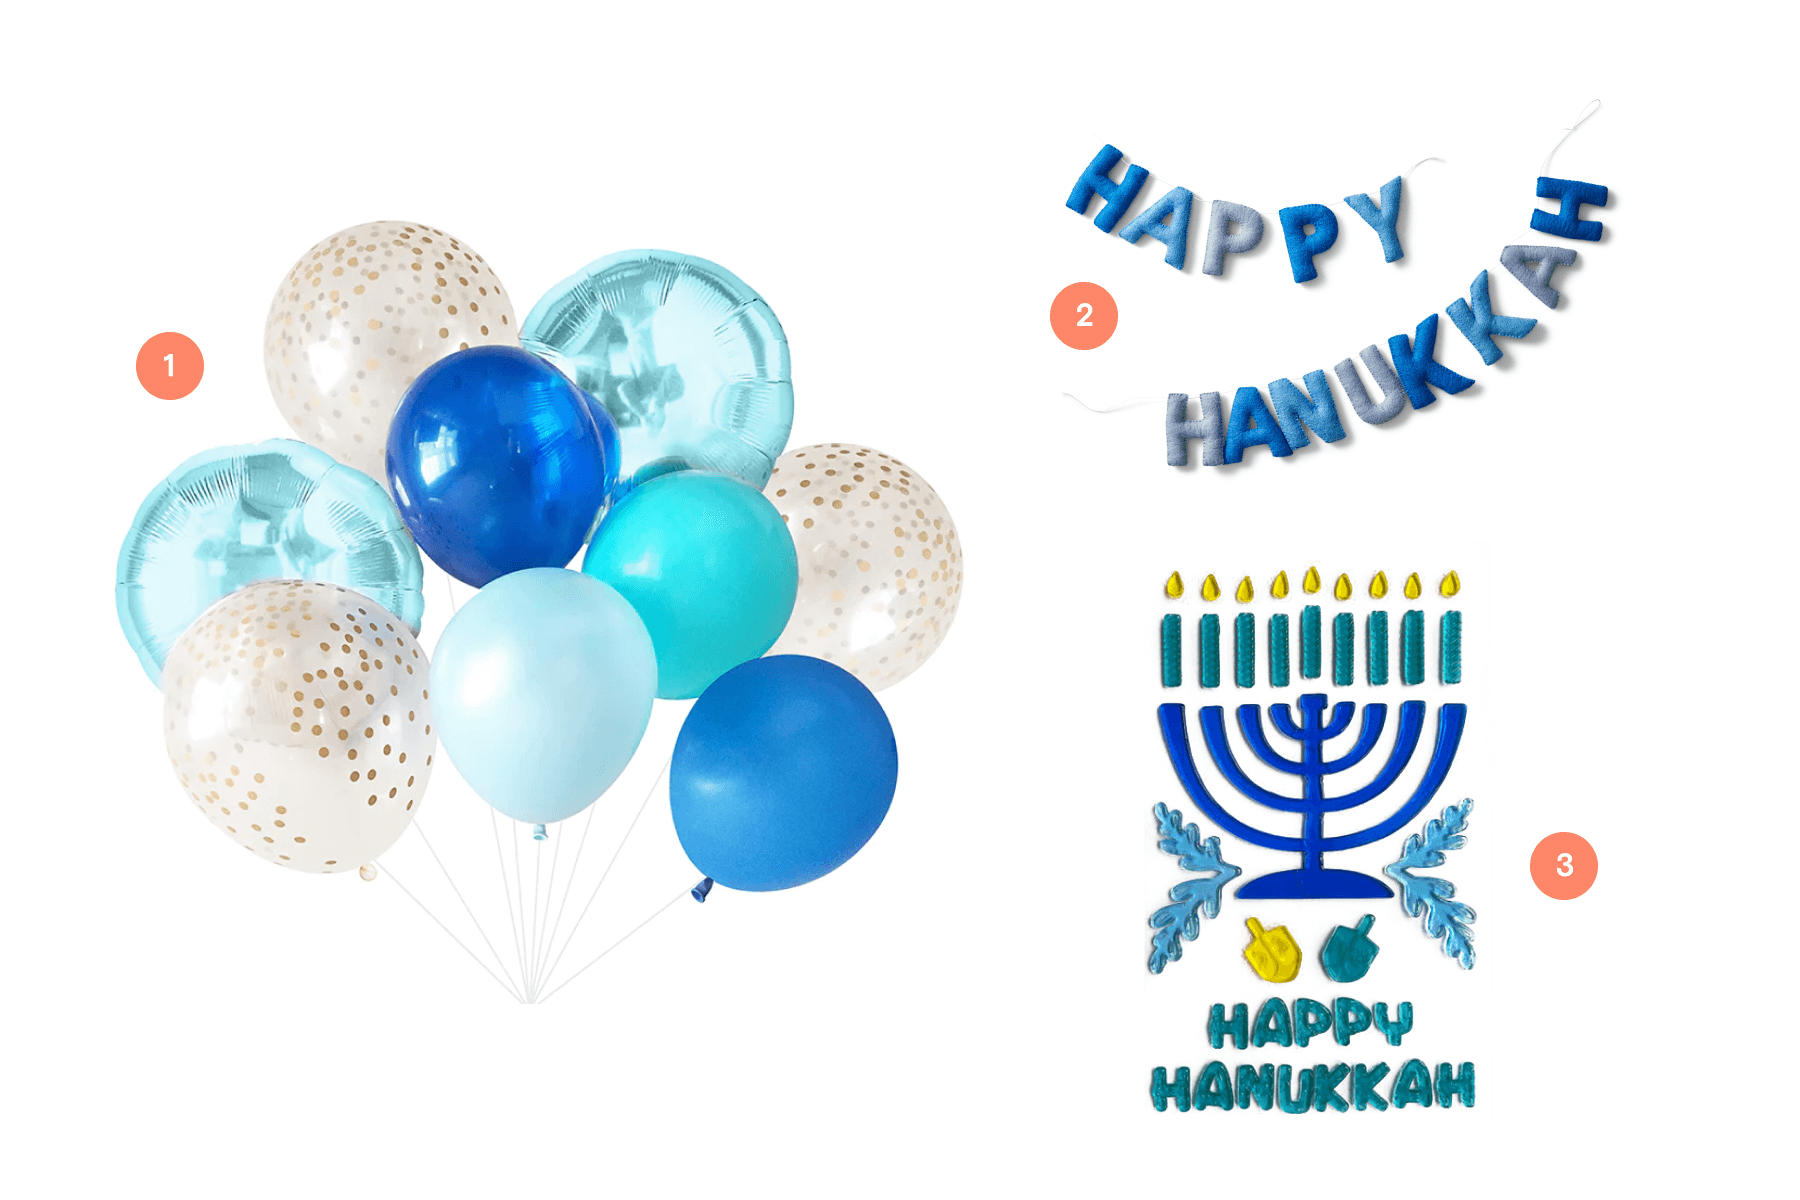 Party décor including a bouquet of balloons, a felted banner that reads “Happy Hanukkah,” and a window cling menorah and other festive items.